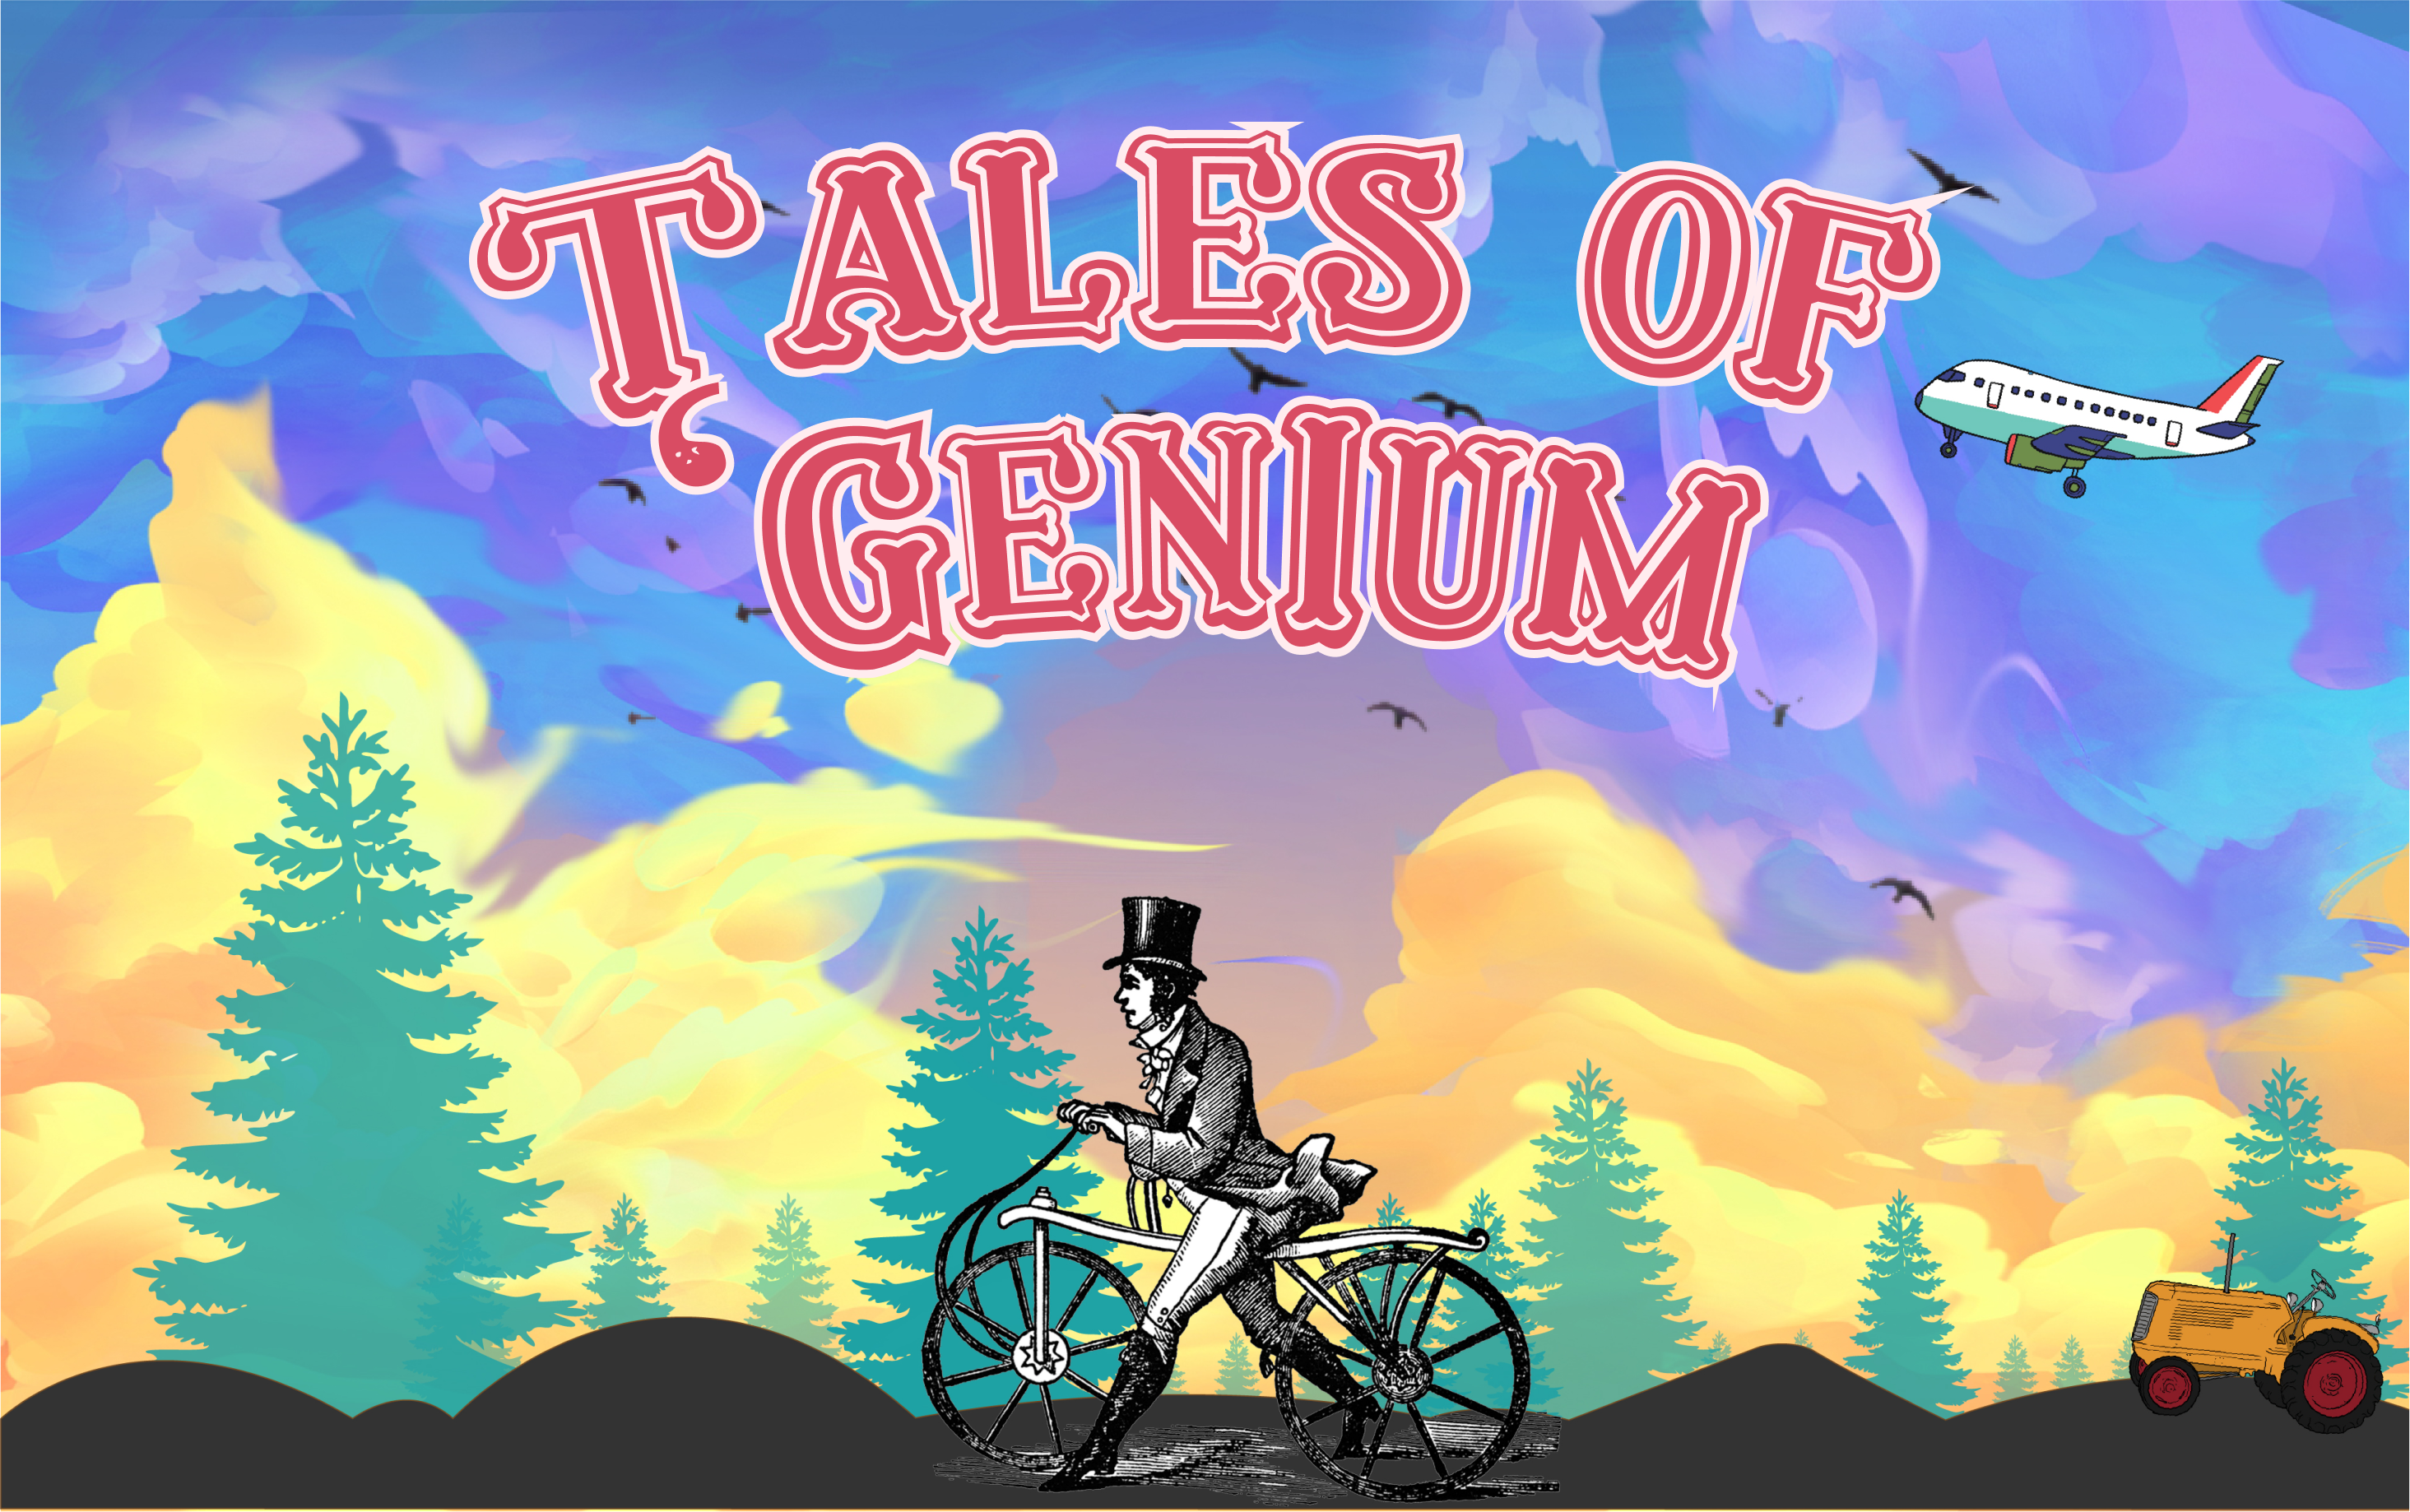 Canadian-looking landscape that has dark, hilly ground, evergreen trees and a colourful sunset. Centred is a man in a top hat and in the style of the late 1800’s, walking a bicycle. In the corner is a yellow tractor and in the air above, an airplane with title: Tales of 'Genium.